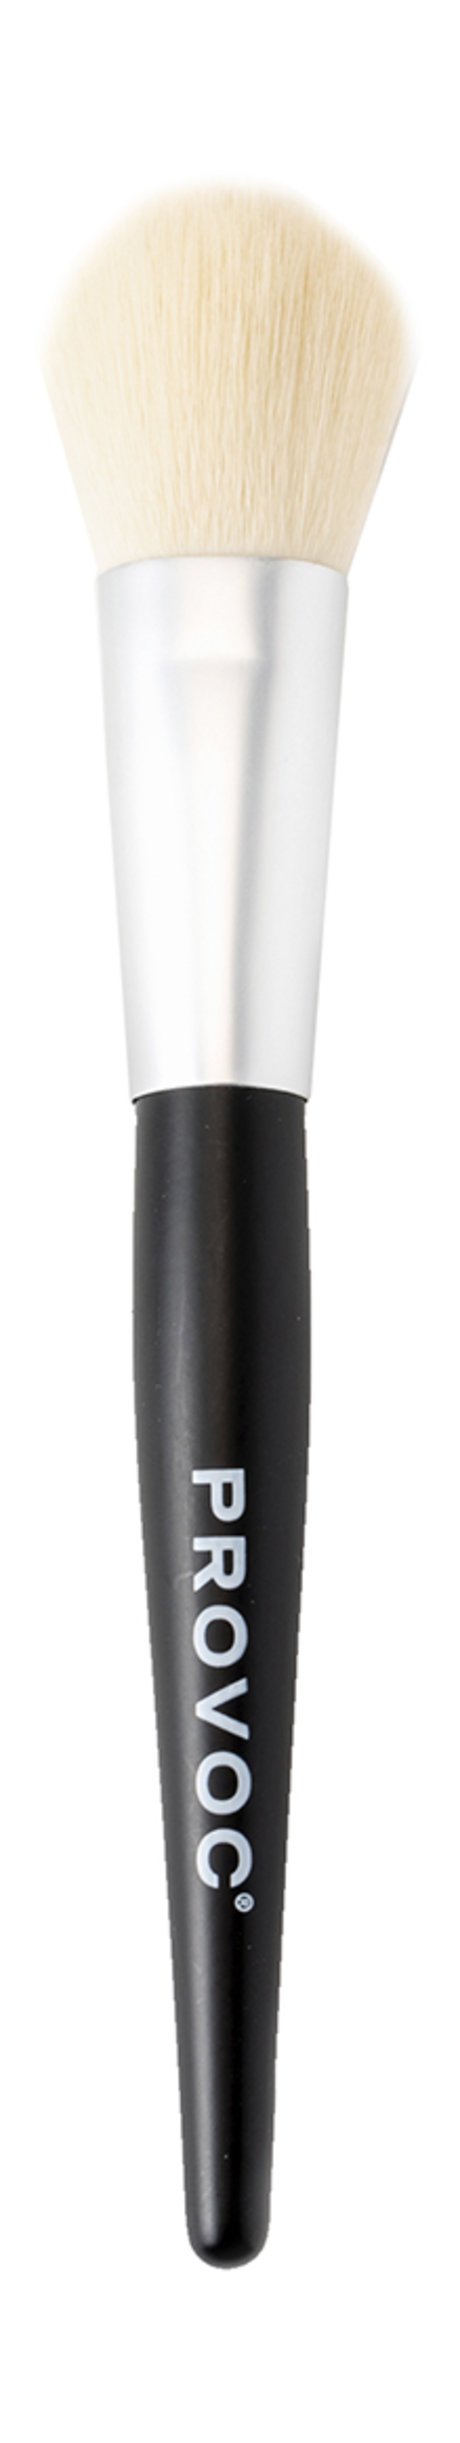 Provoc Brush For Dry Face Correction